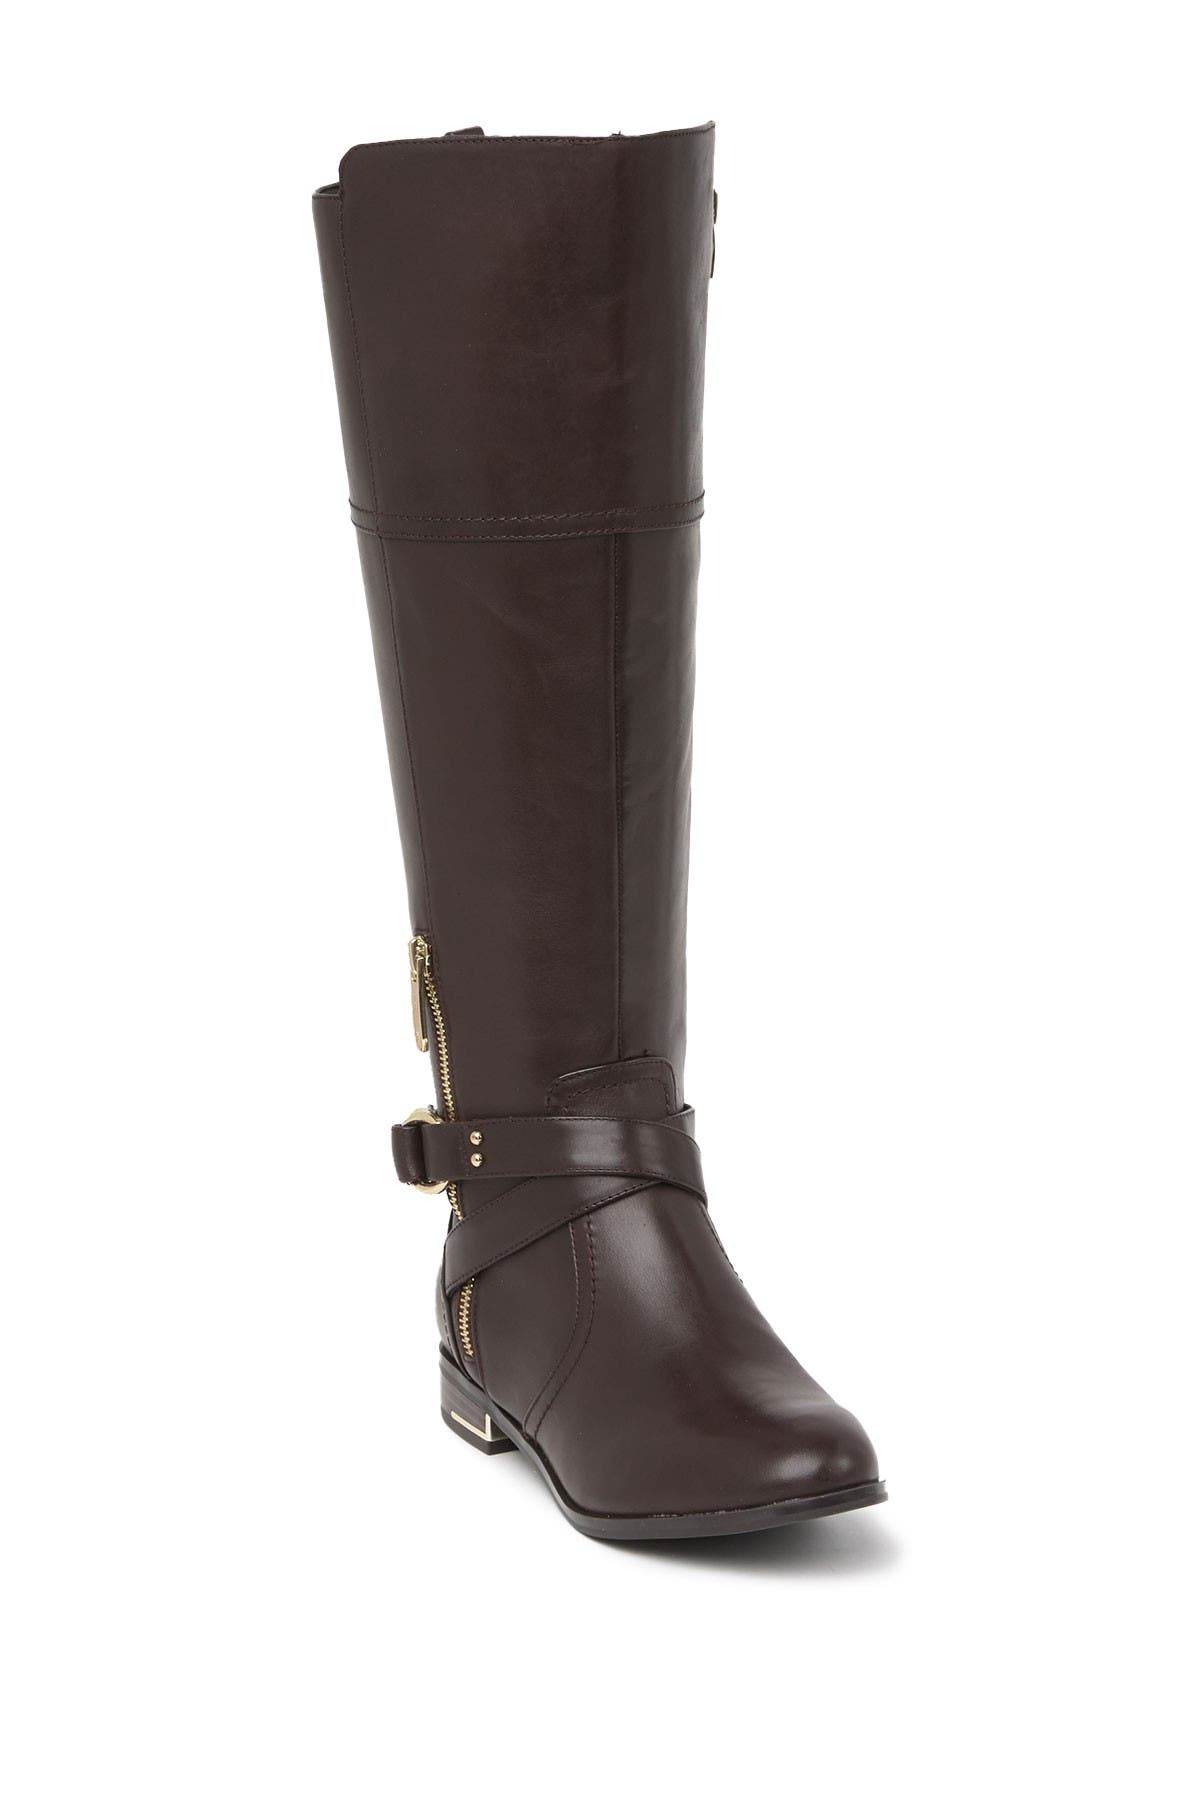 Nine West | Linore Tall Riding Boot 